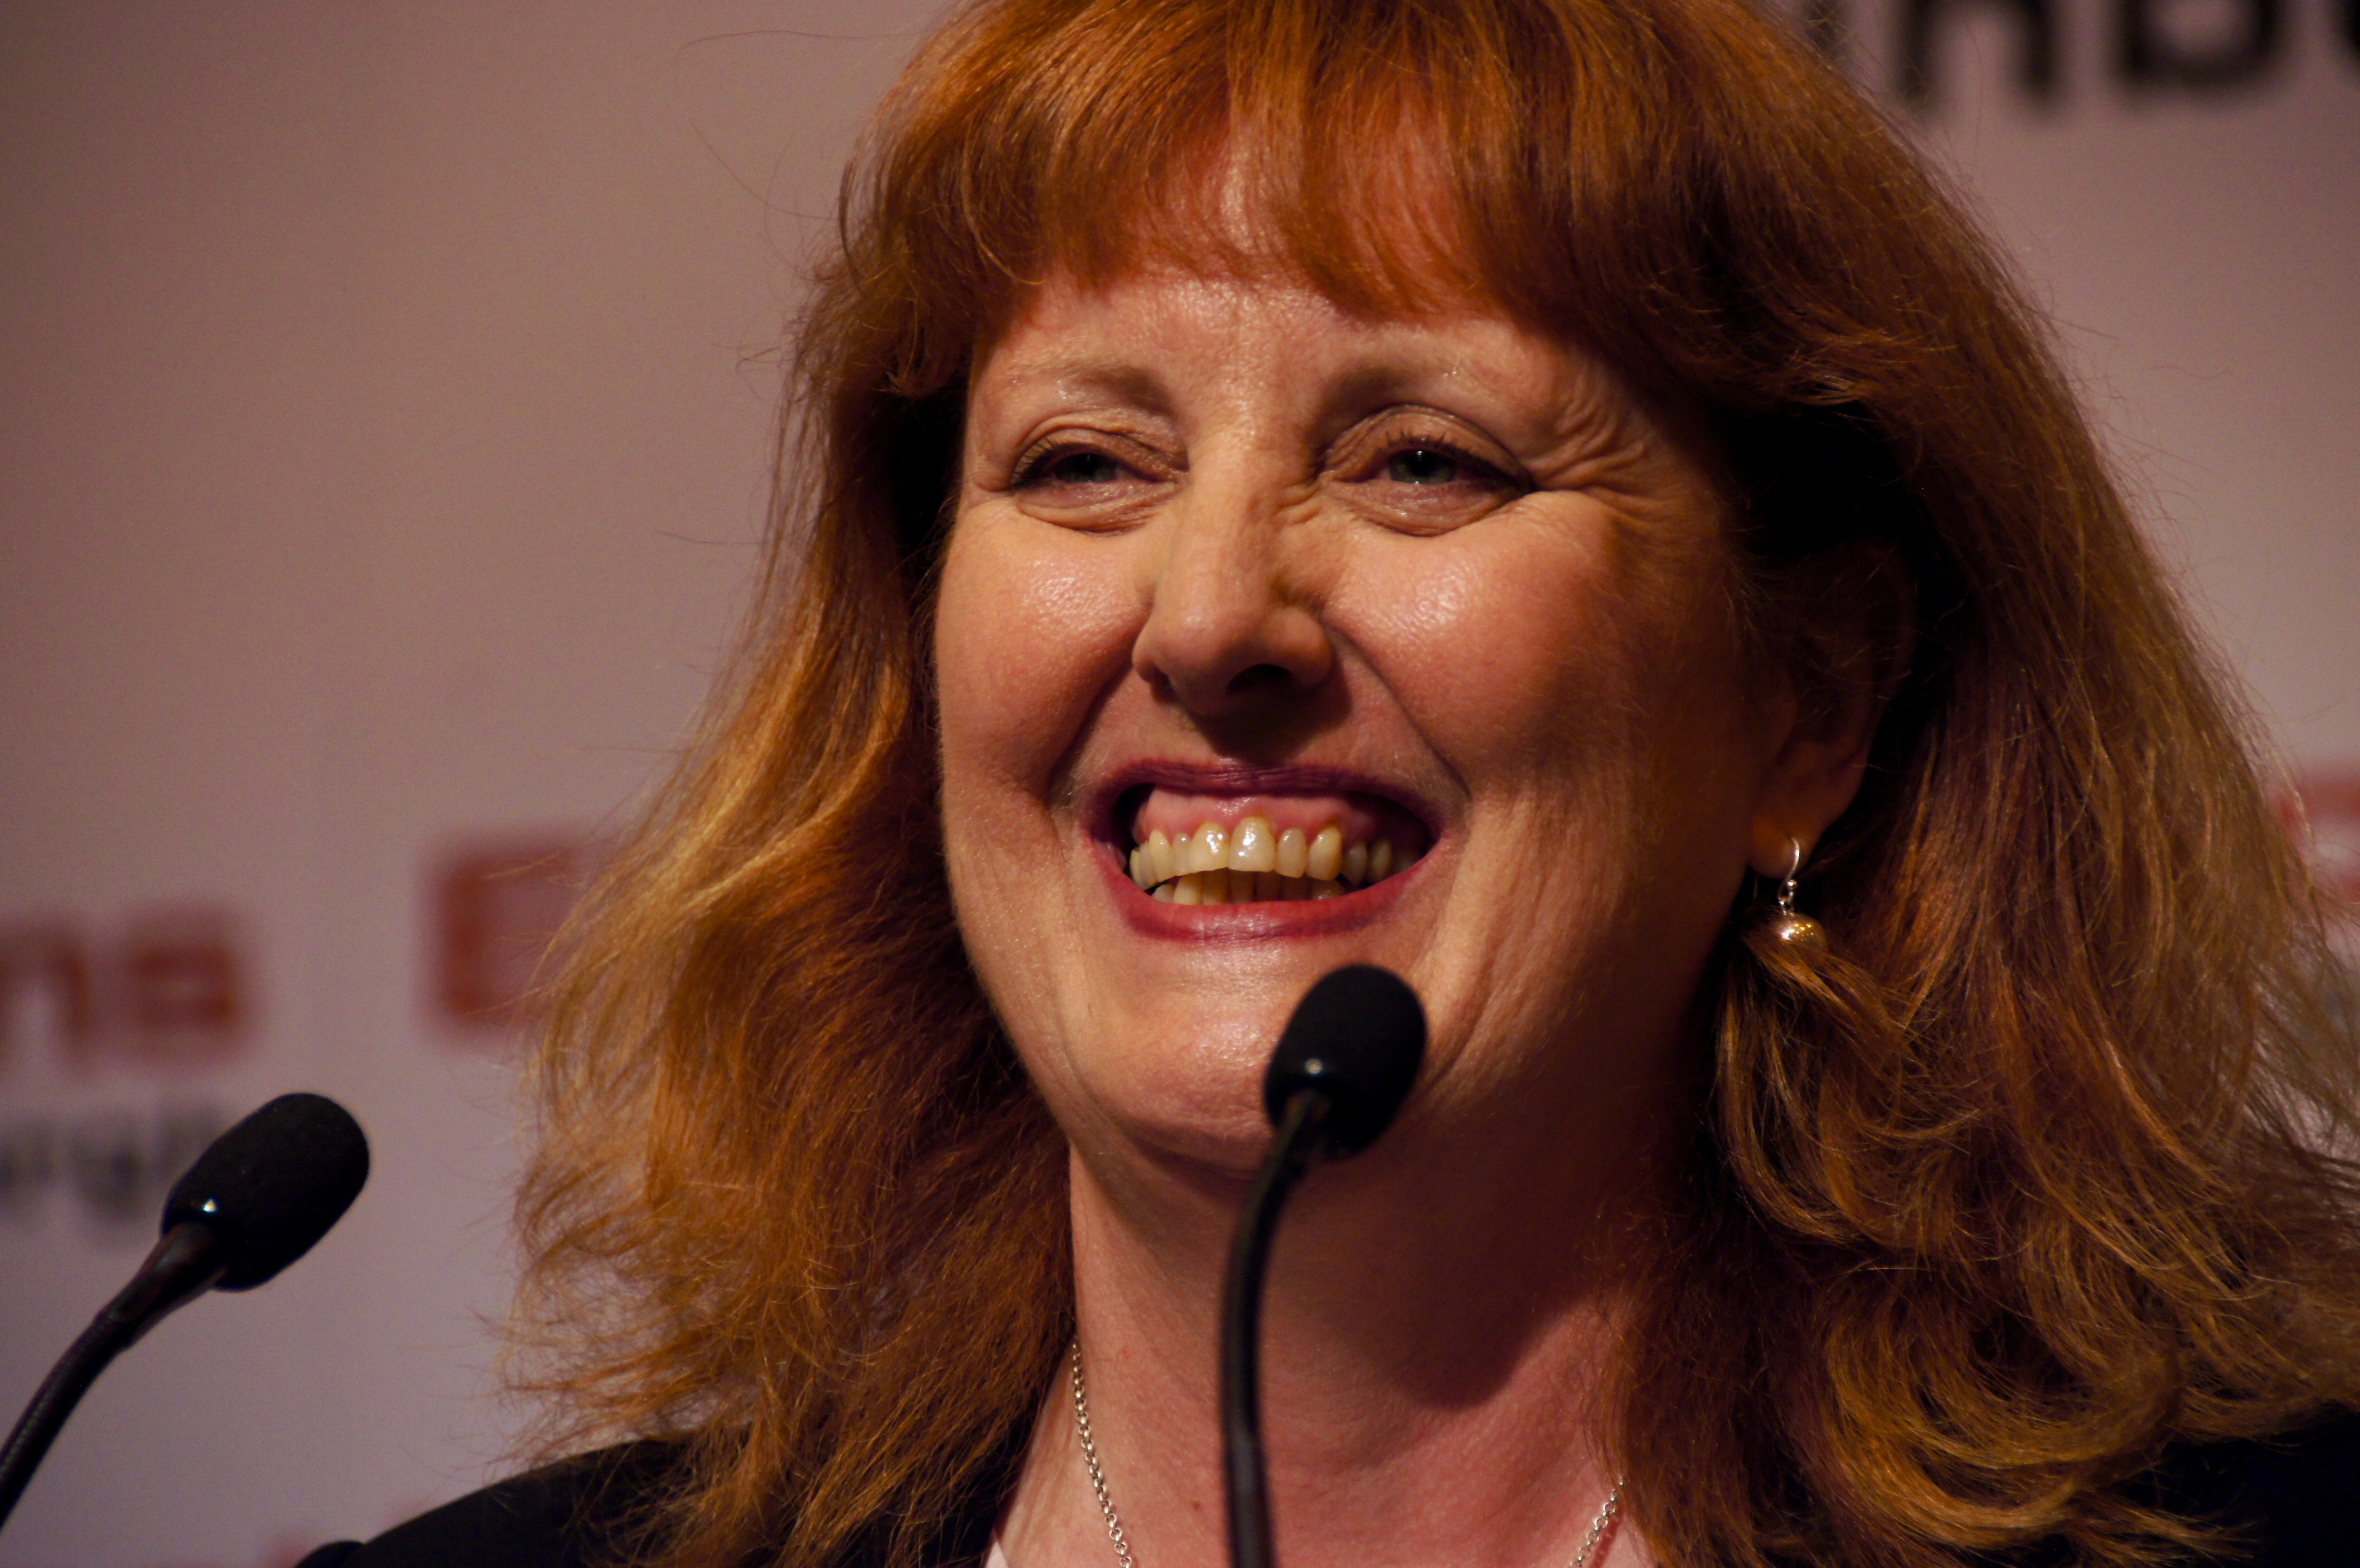 Deidre Brock MP was elected for the second time at the General Election 2017